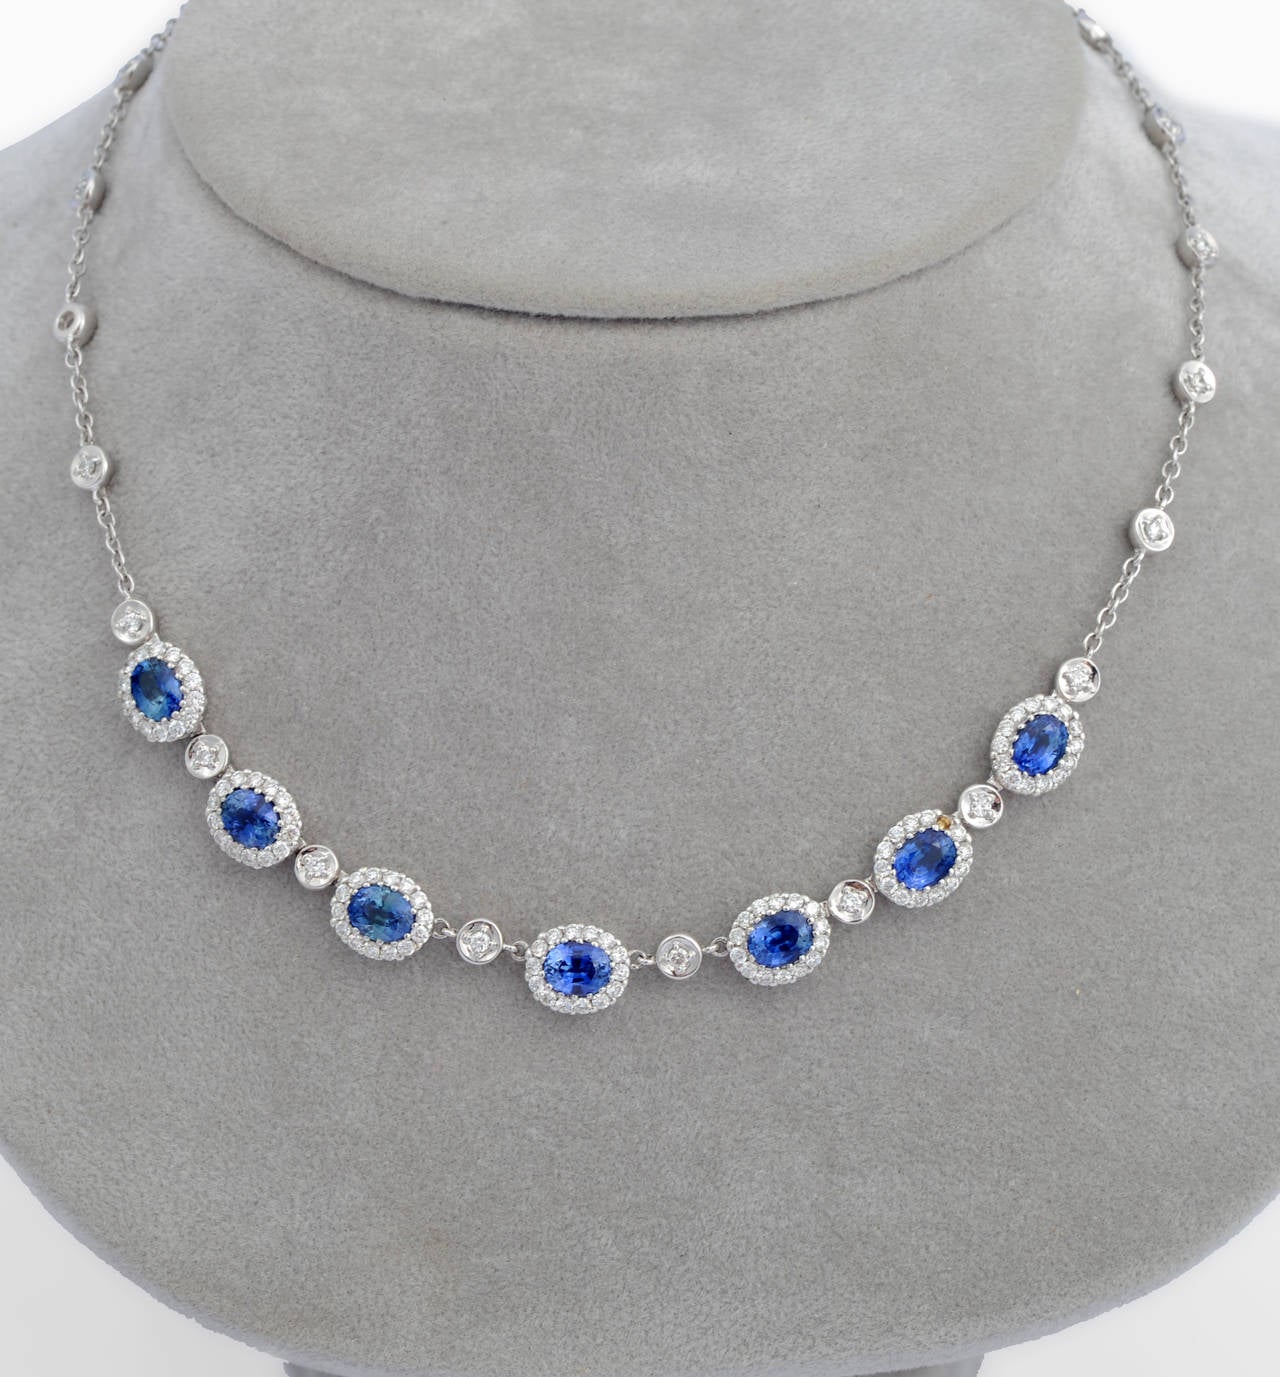 The delicate chain set with alternating diamonds and sapphires.
Ceylon sapphires of homogeneous kingly blue color and exceptional clarity, weighing 3.43-carats.
Excellent quality circular-cut and brilliant-cut diamonds together weighing